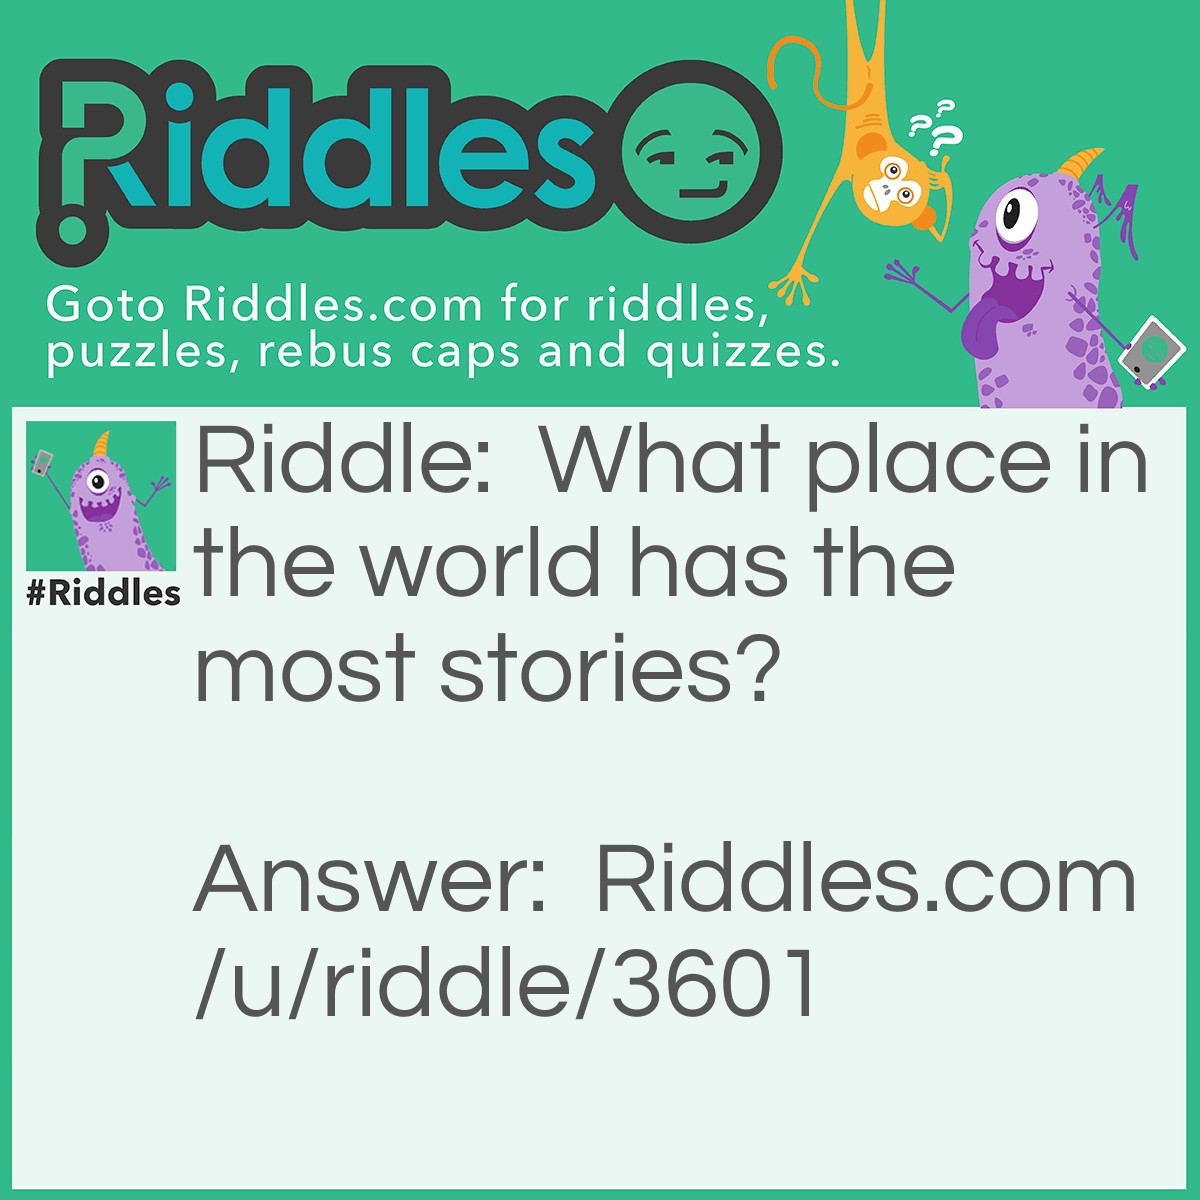 Riddle: What place in the world has the most stories? Answer: The Library! Get it?